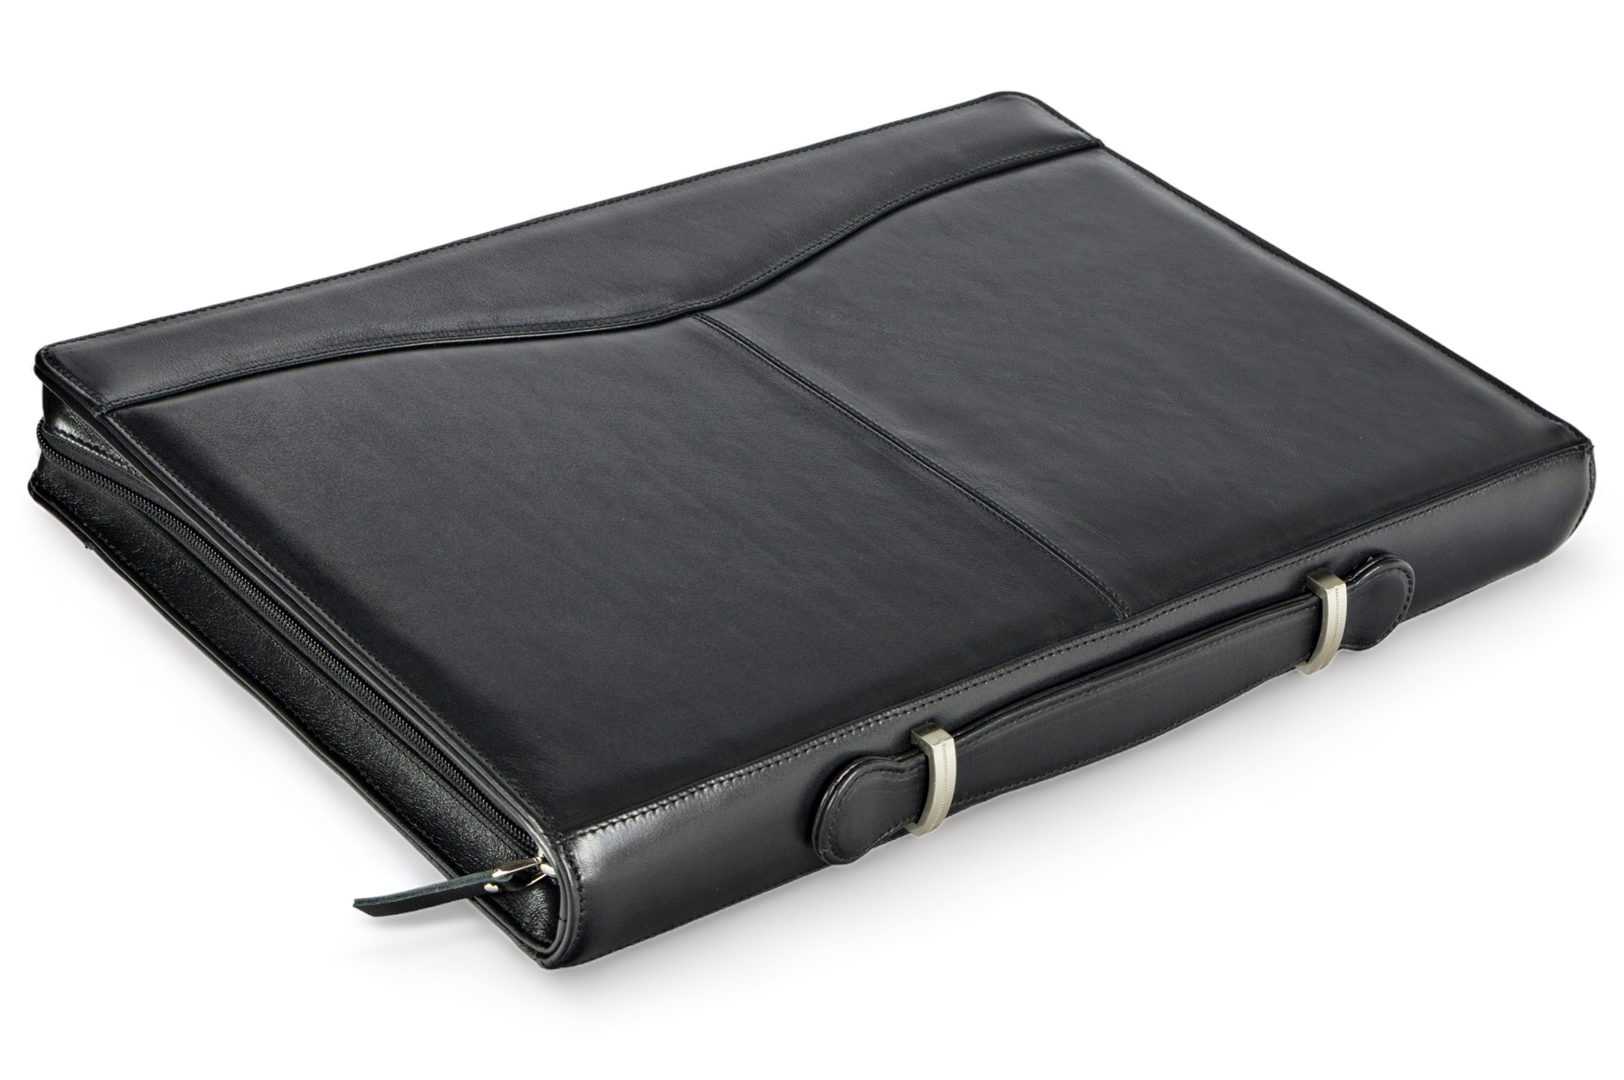 A4 zippered conference folder made of genuine leather. 2R BL 0-1F